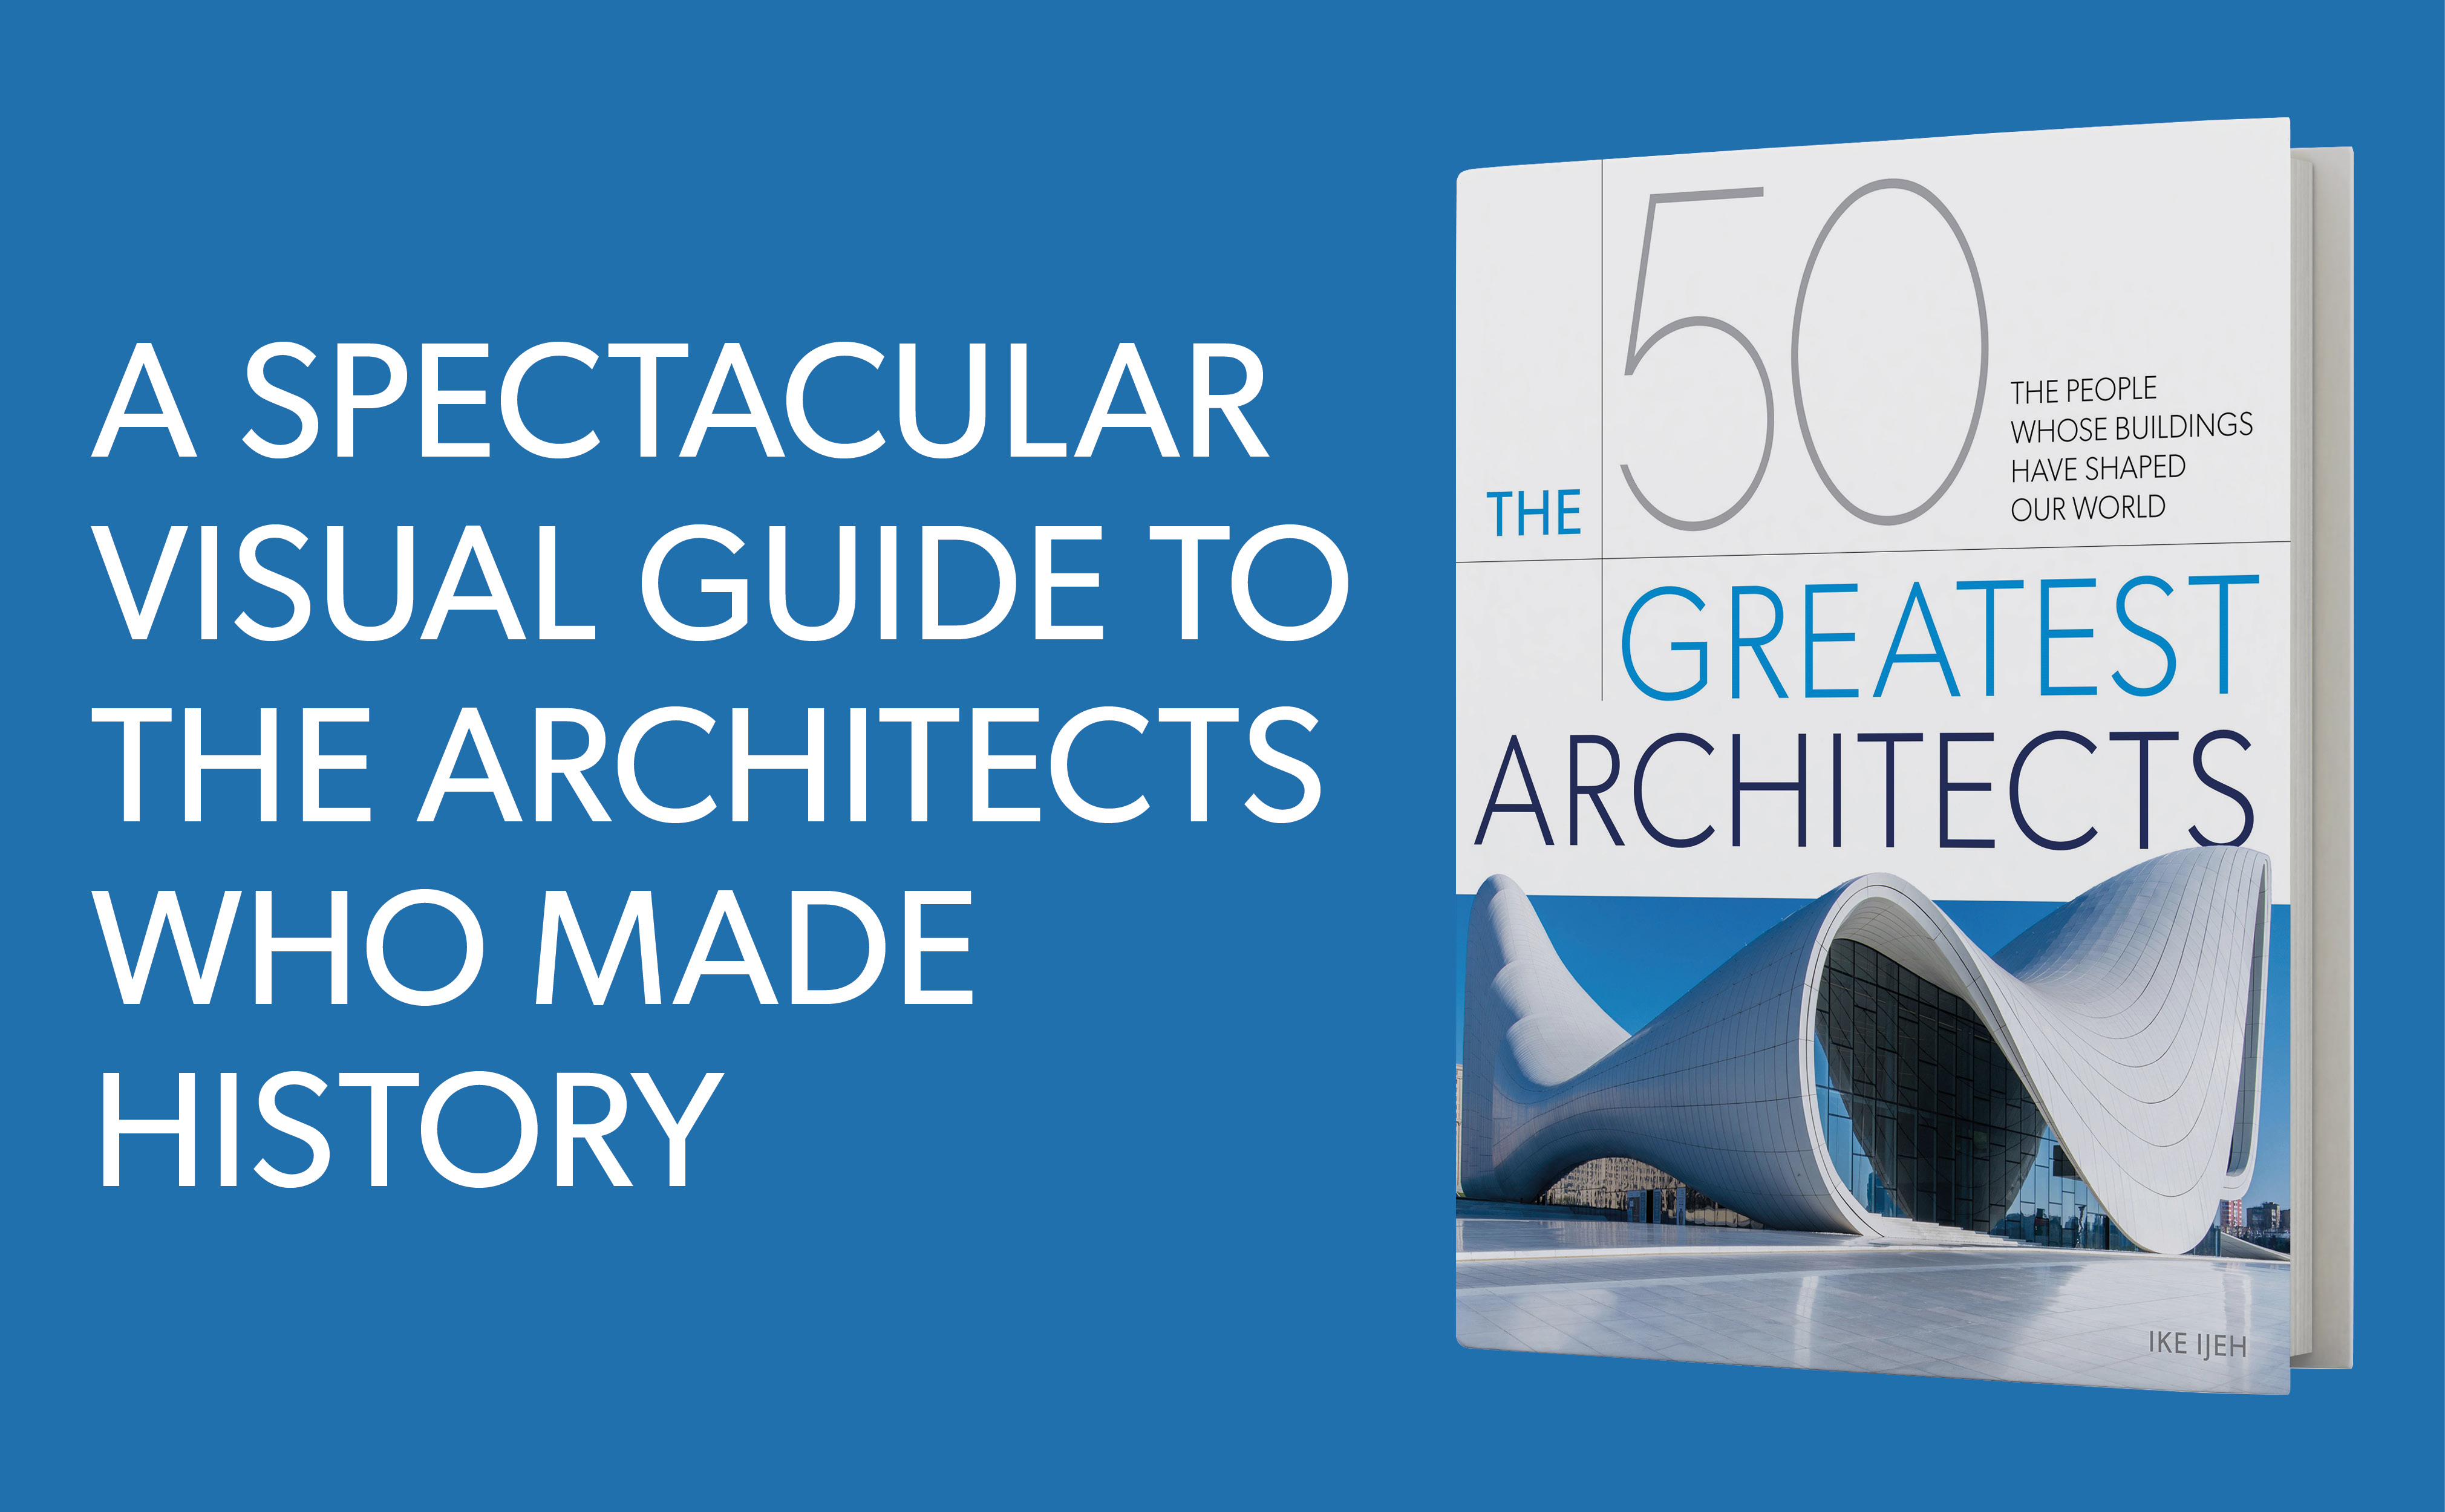 A spectacular visual guide to the architects who made history